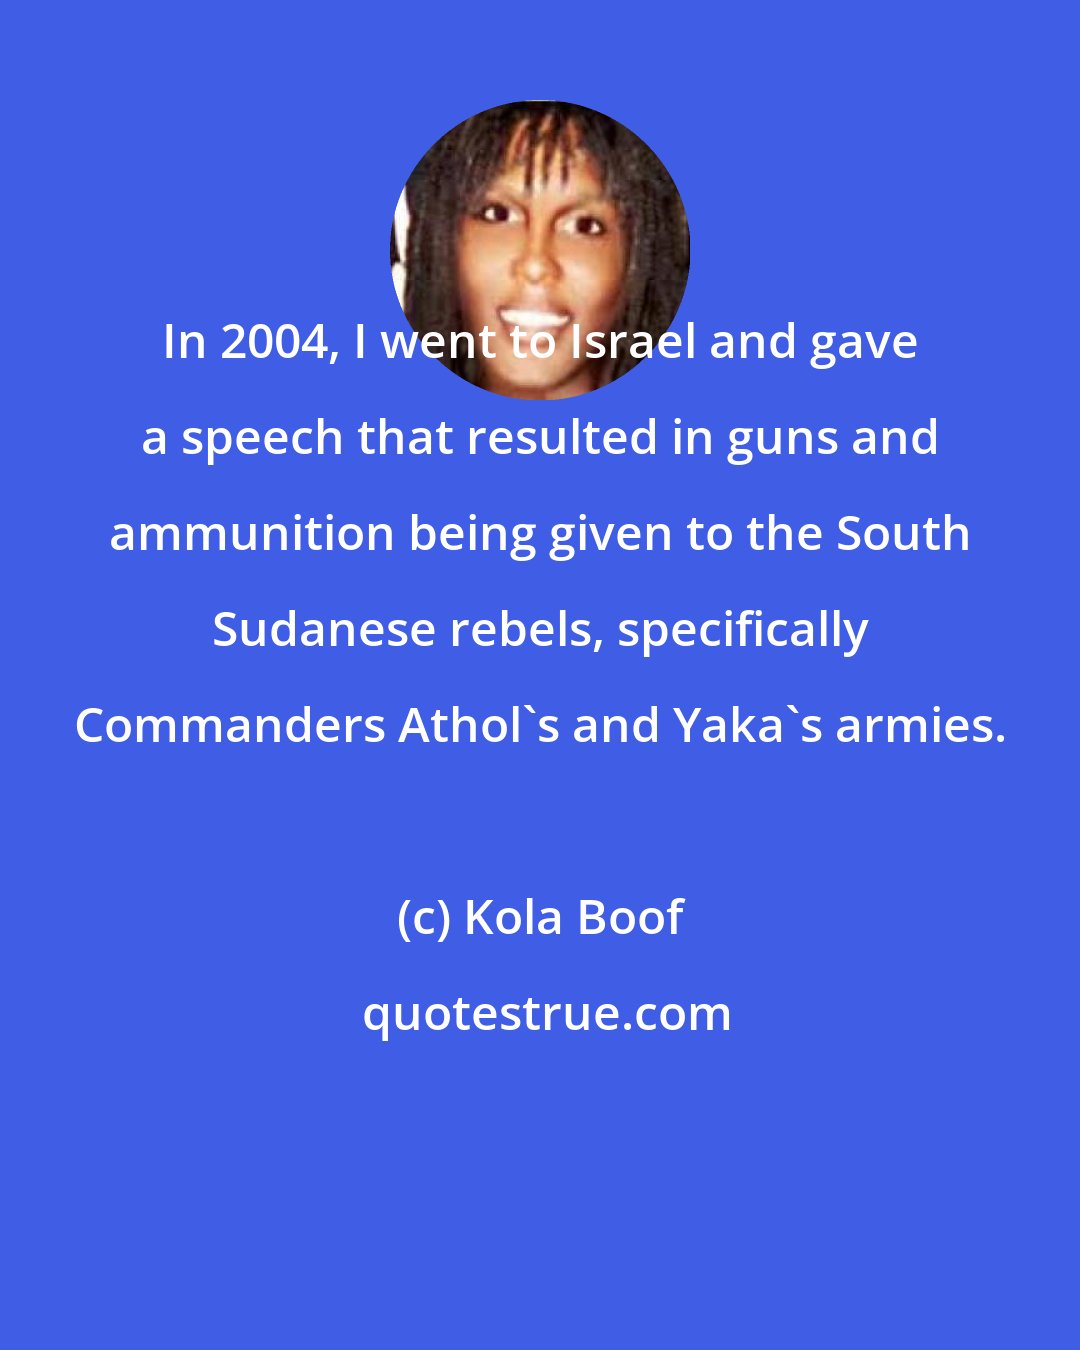 Kola Boof: In 2004, I went to Israel and gave a speech that resulted in guns and ammunition being given to the South Sudanese rebels, specifically Commanders Athol's and Yaka's armies.